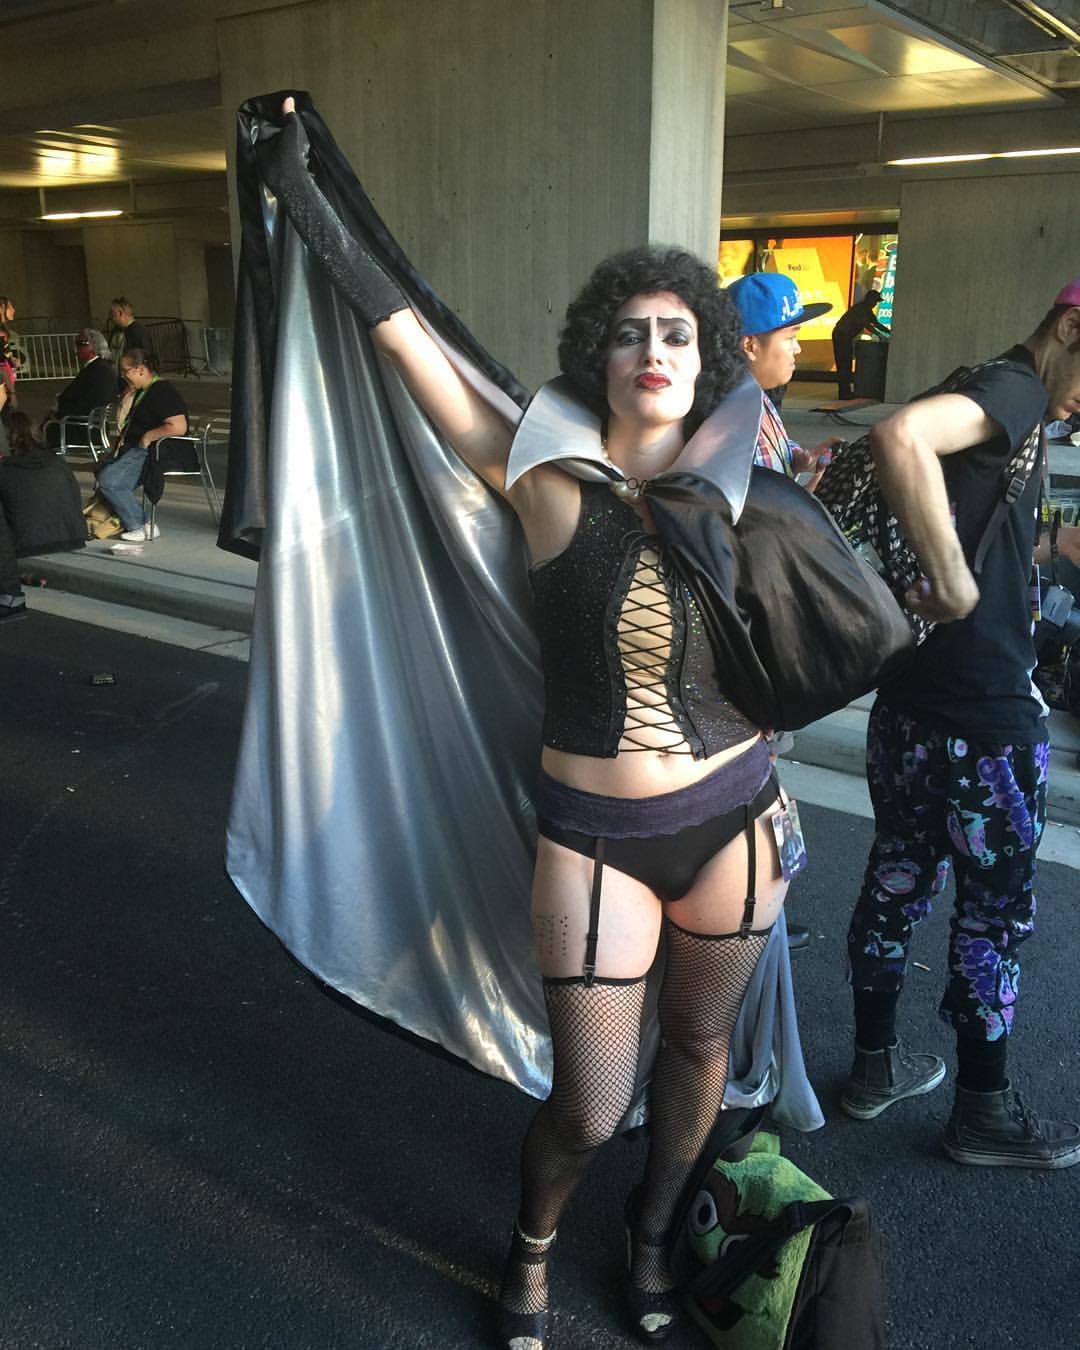 demongurl6:
“ The one and only Dr. Frankenfurter! I got to touch frankenfurter package! Lol #throckyhorrorpictureshow #nycc #nycc2015 #cosplay #drfrankenfurter
”
hey, that’s me!